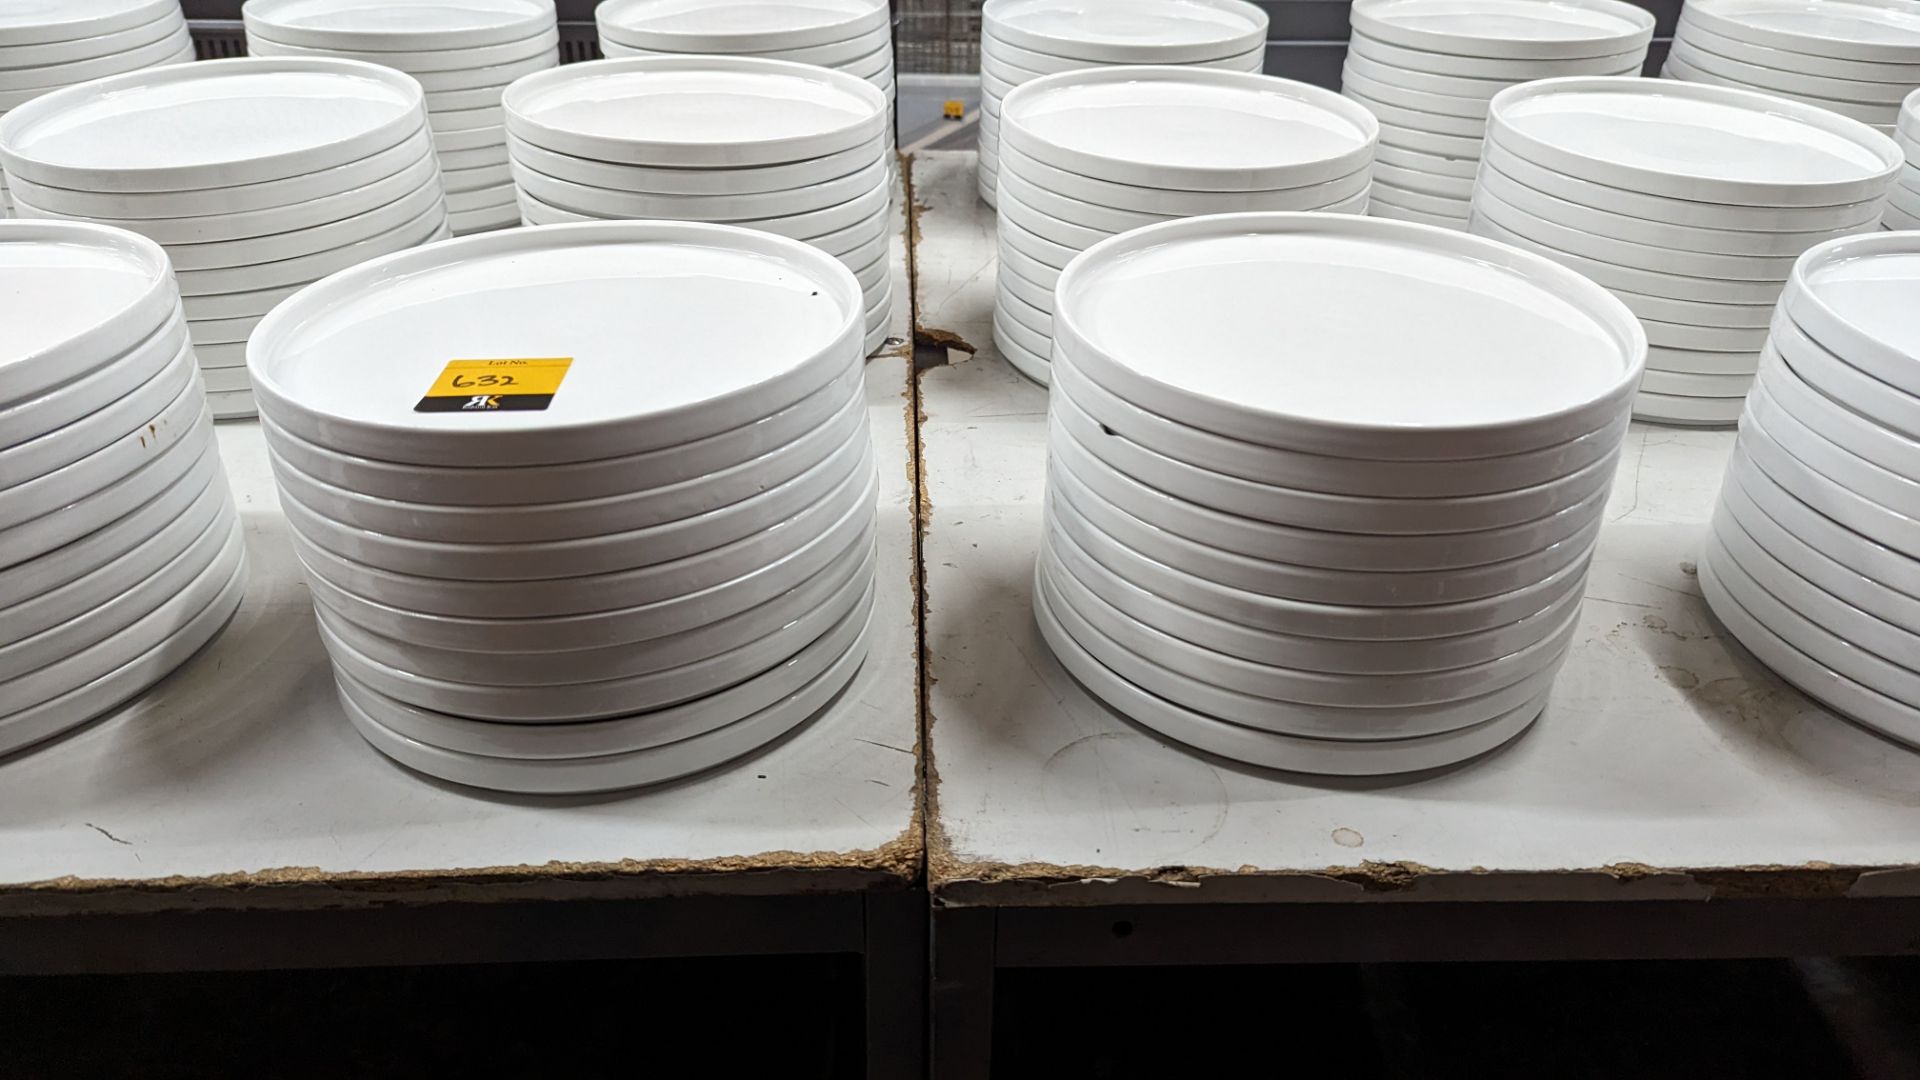 60 off Genware 245mm round flat plates with upright rim to the outer edge - Image 2 of 6